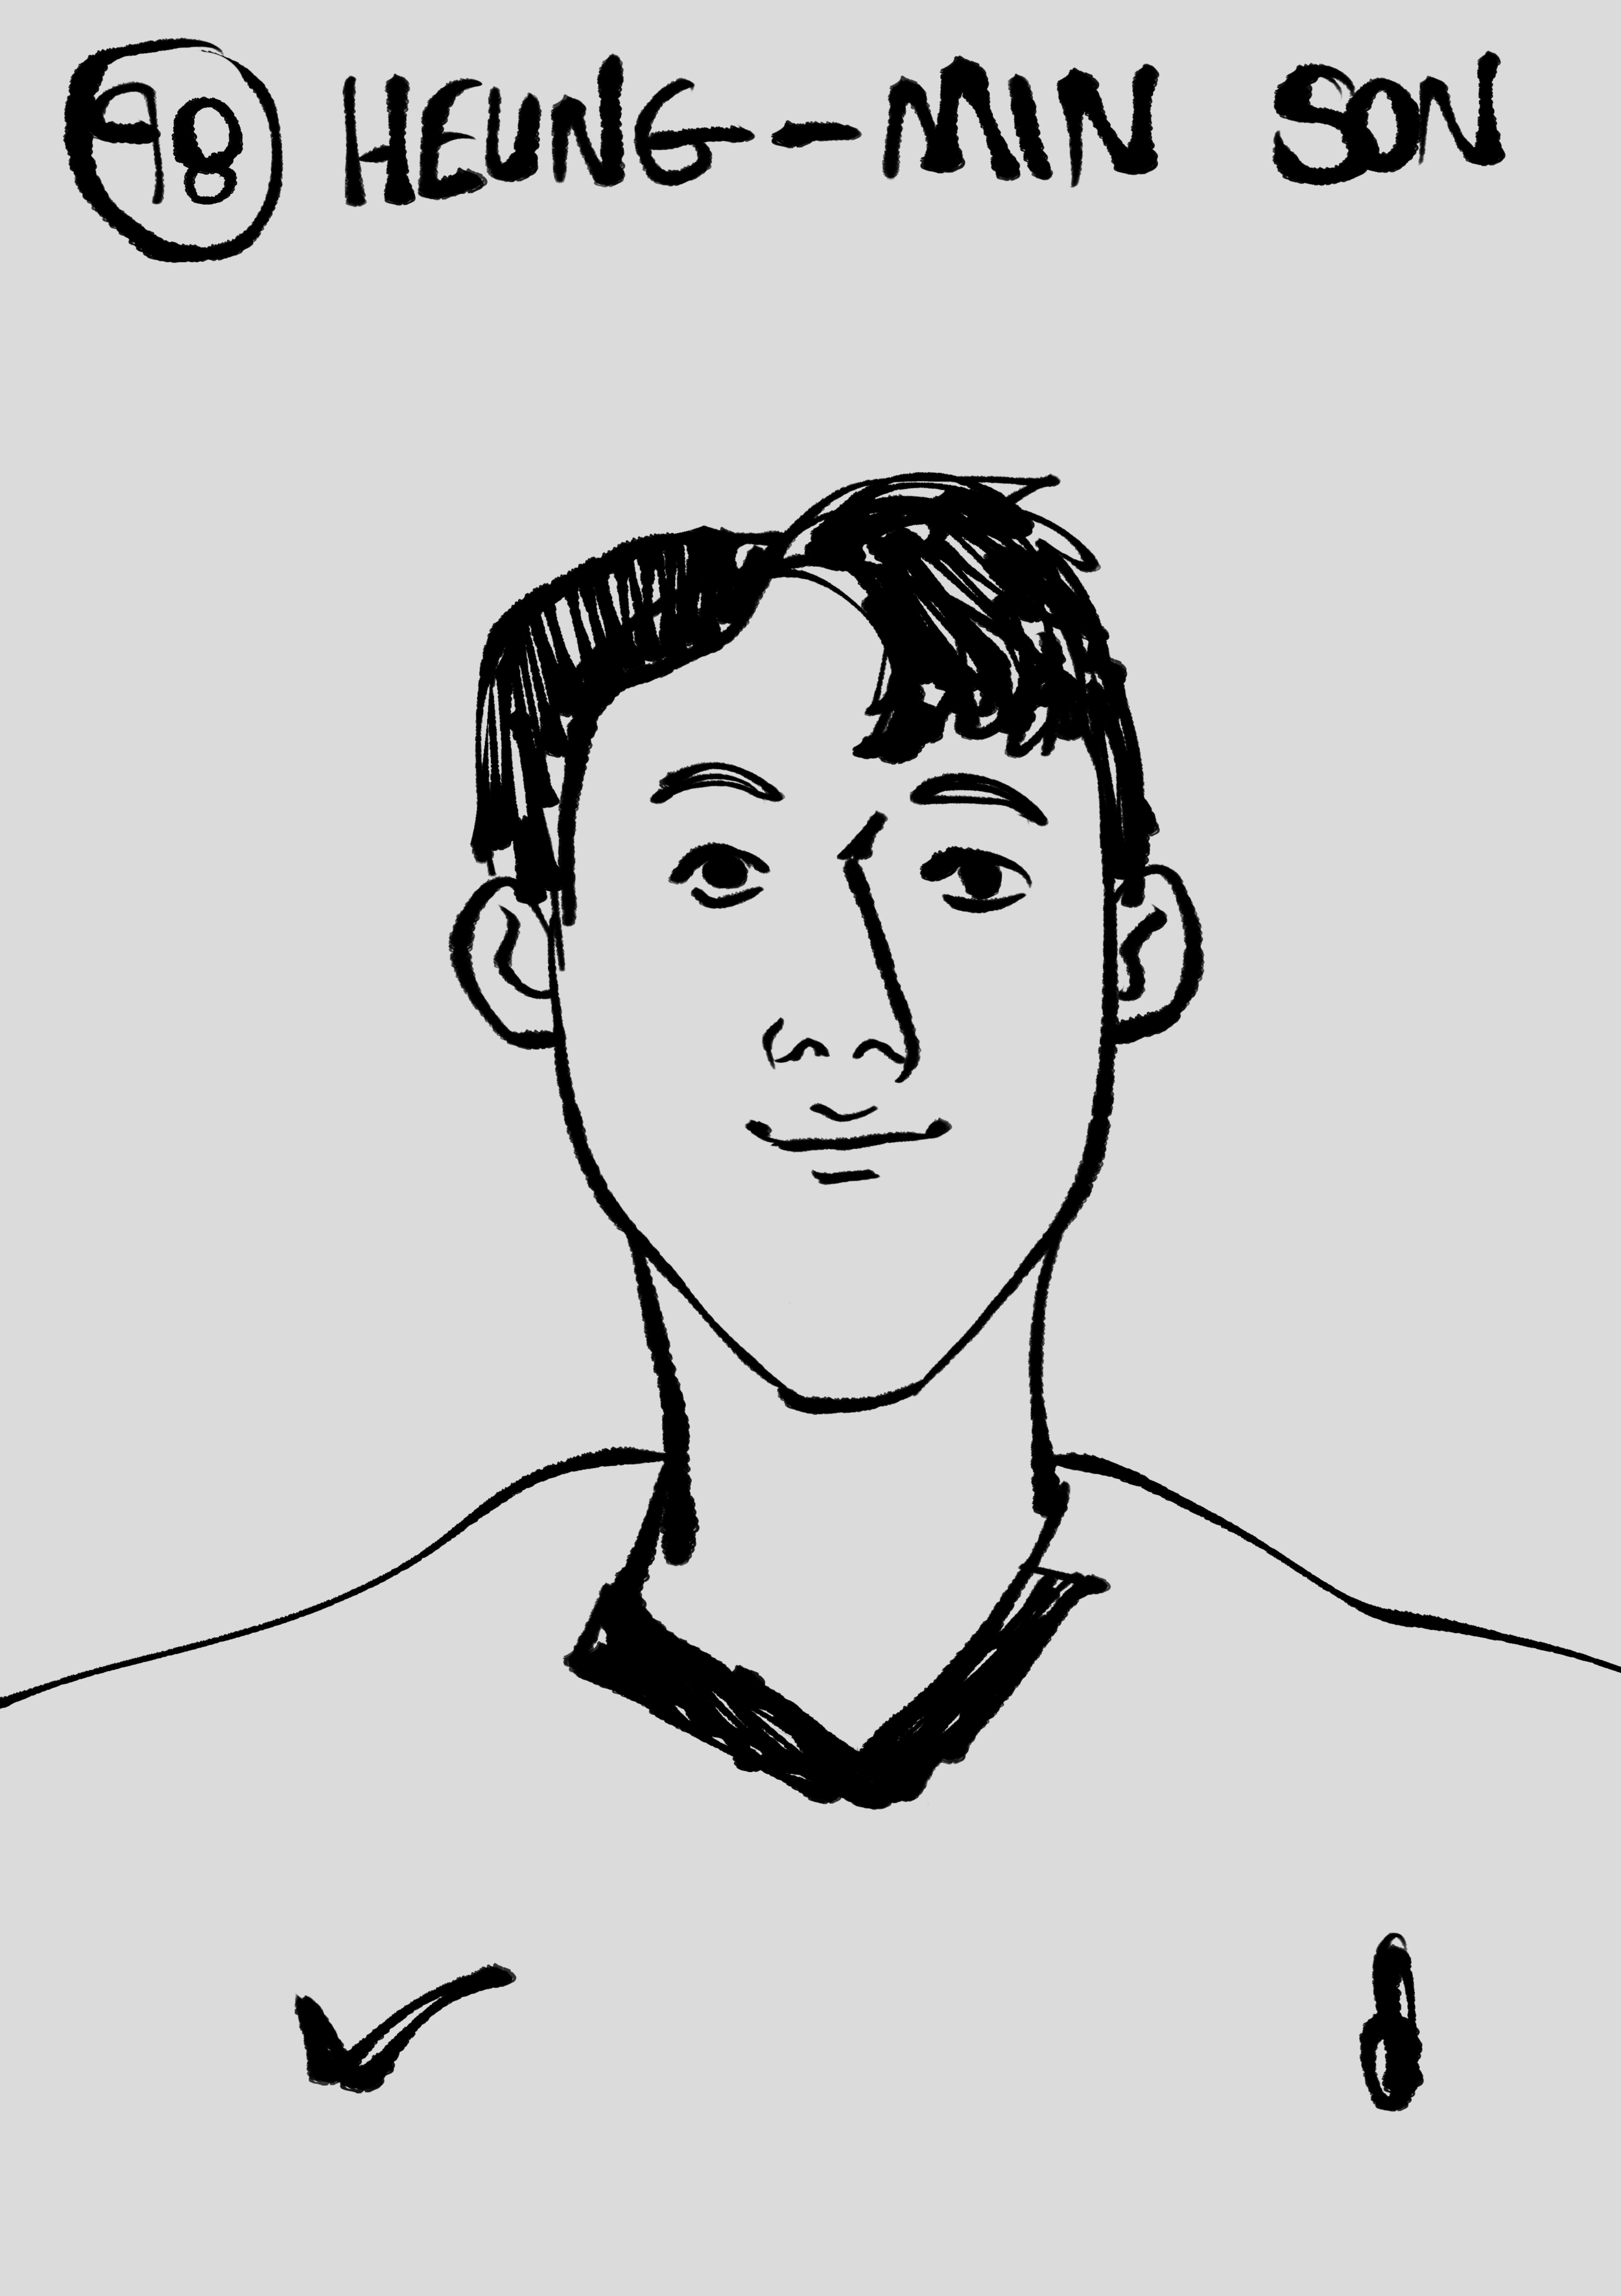 98 heung min son.png